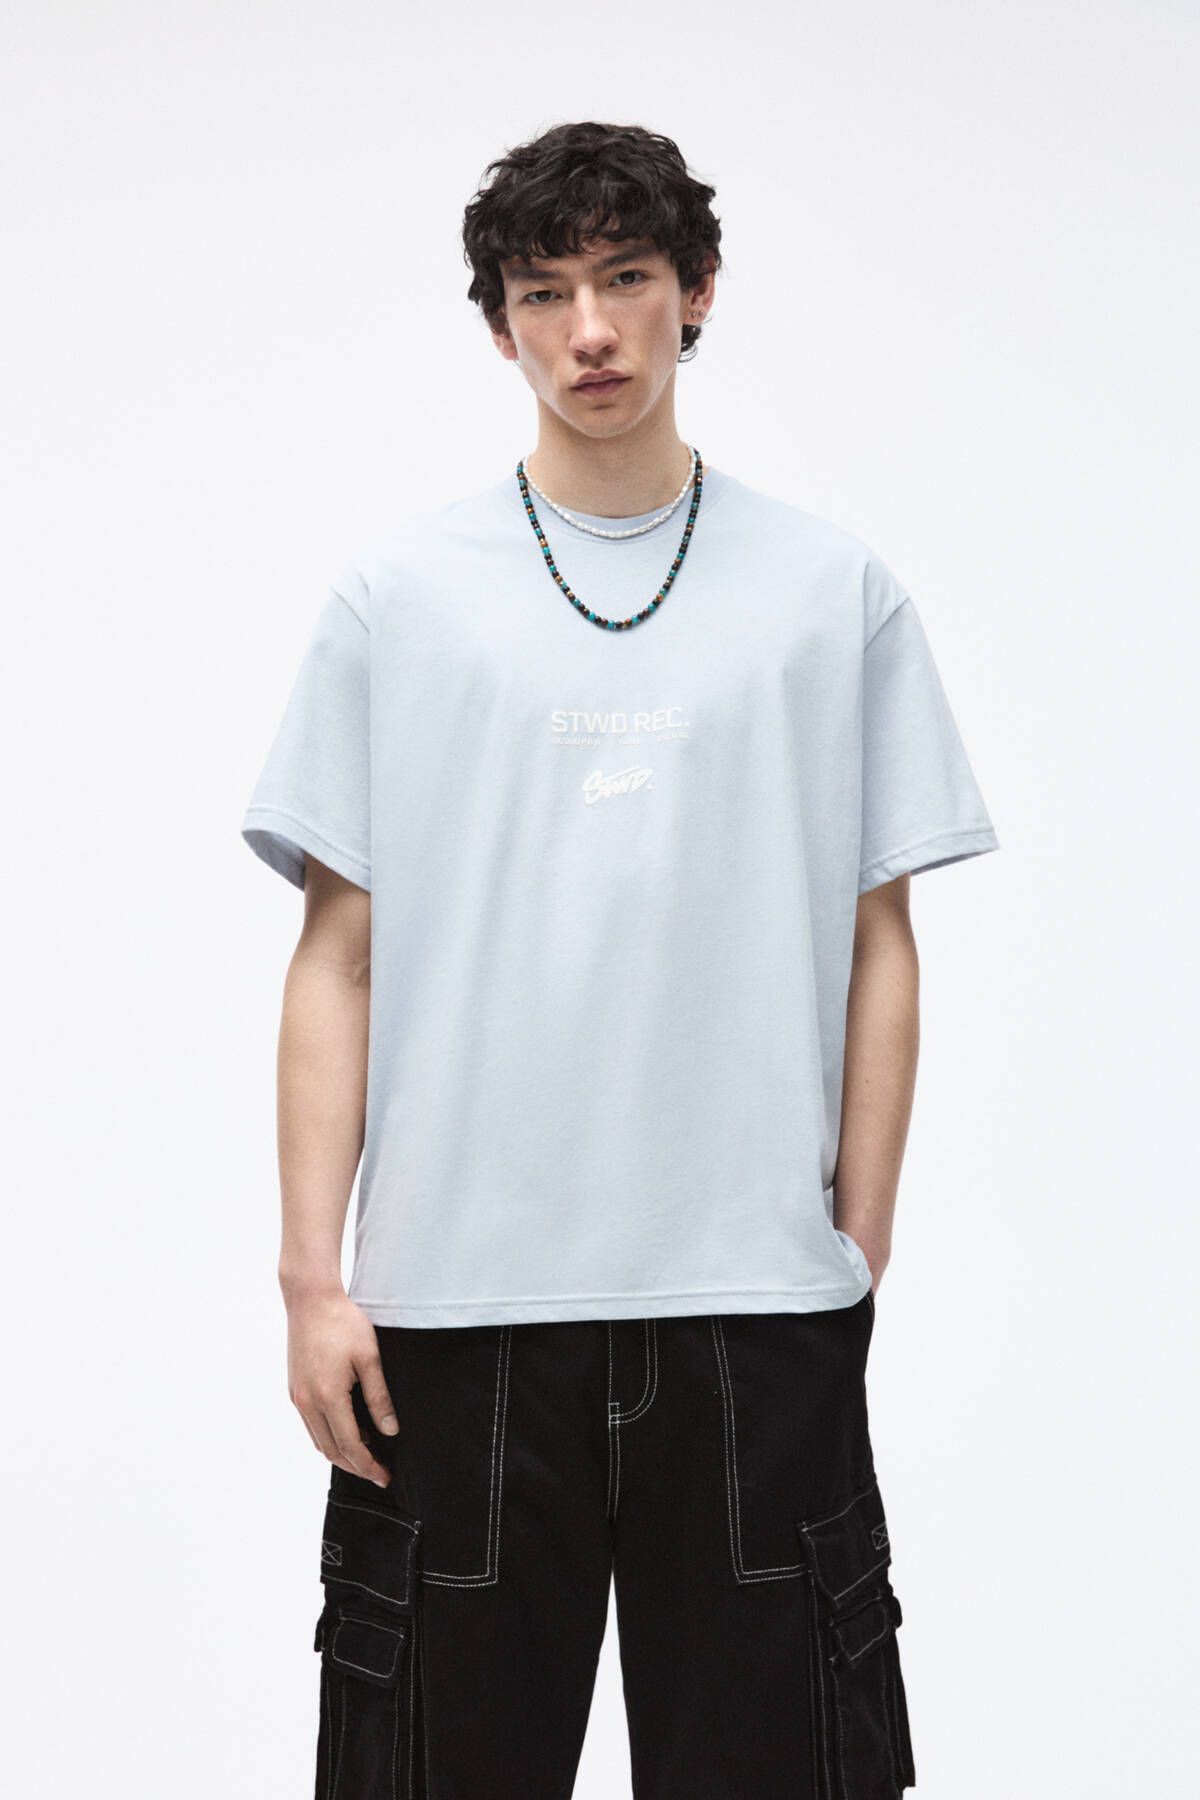 Pull & Bear STWD Records t-shirt